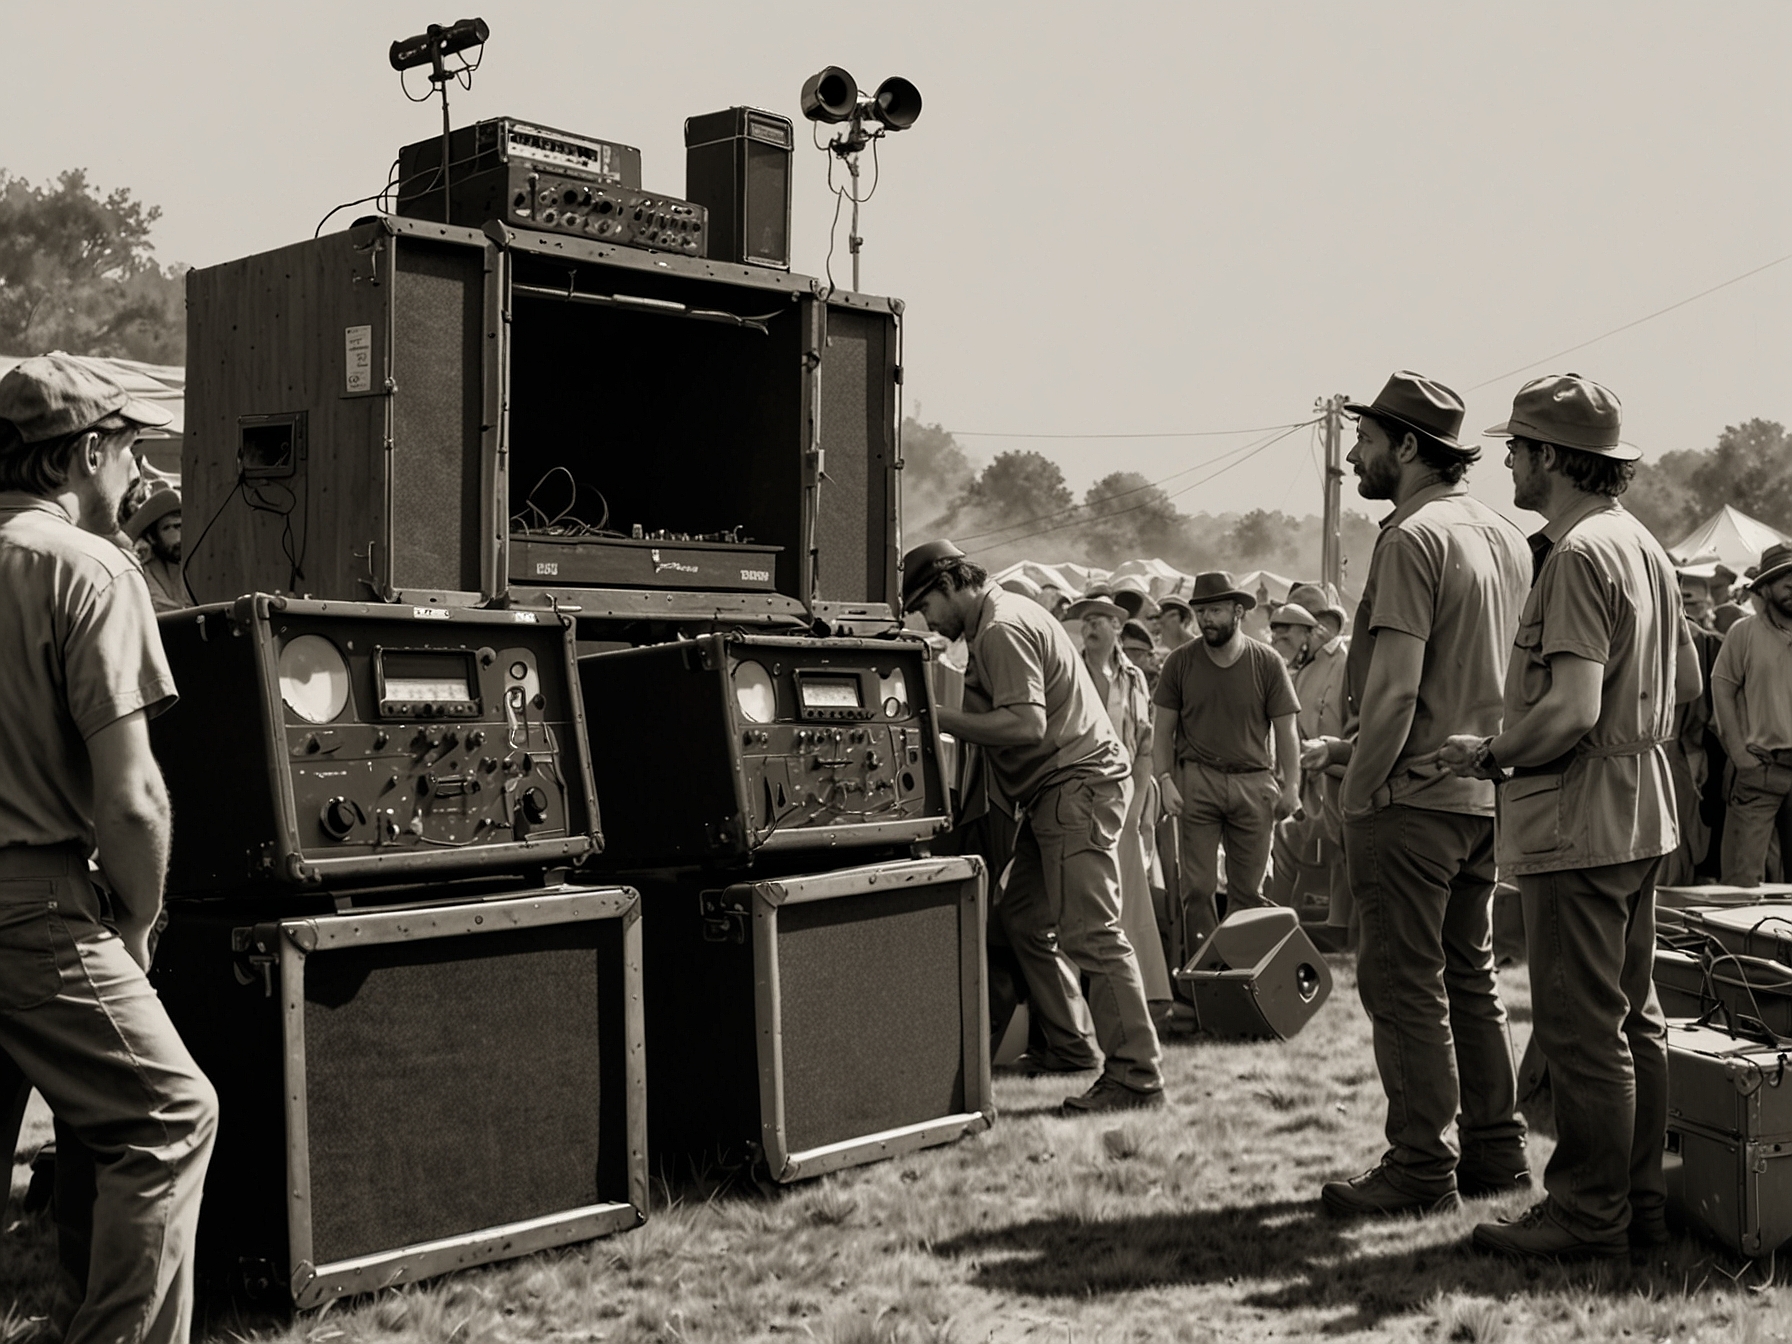 Glastonbury technicians work frantically around sound equipment as the audience waits in anticipation. The image captures the tension and urgency behind the scenes during Twain's set.